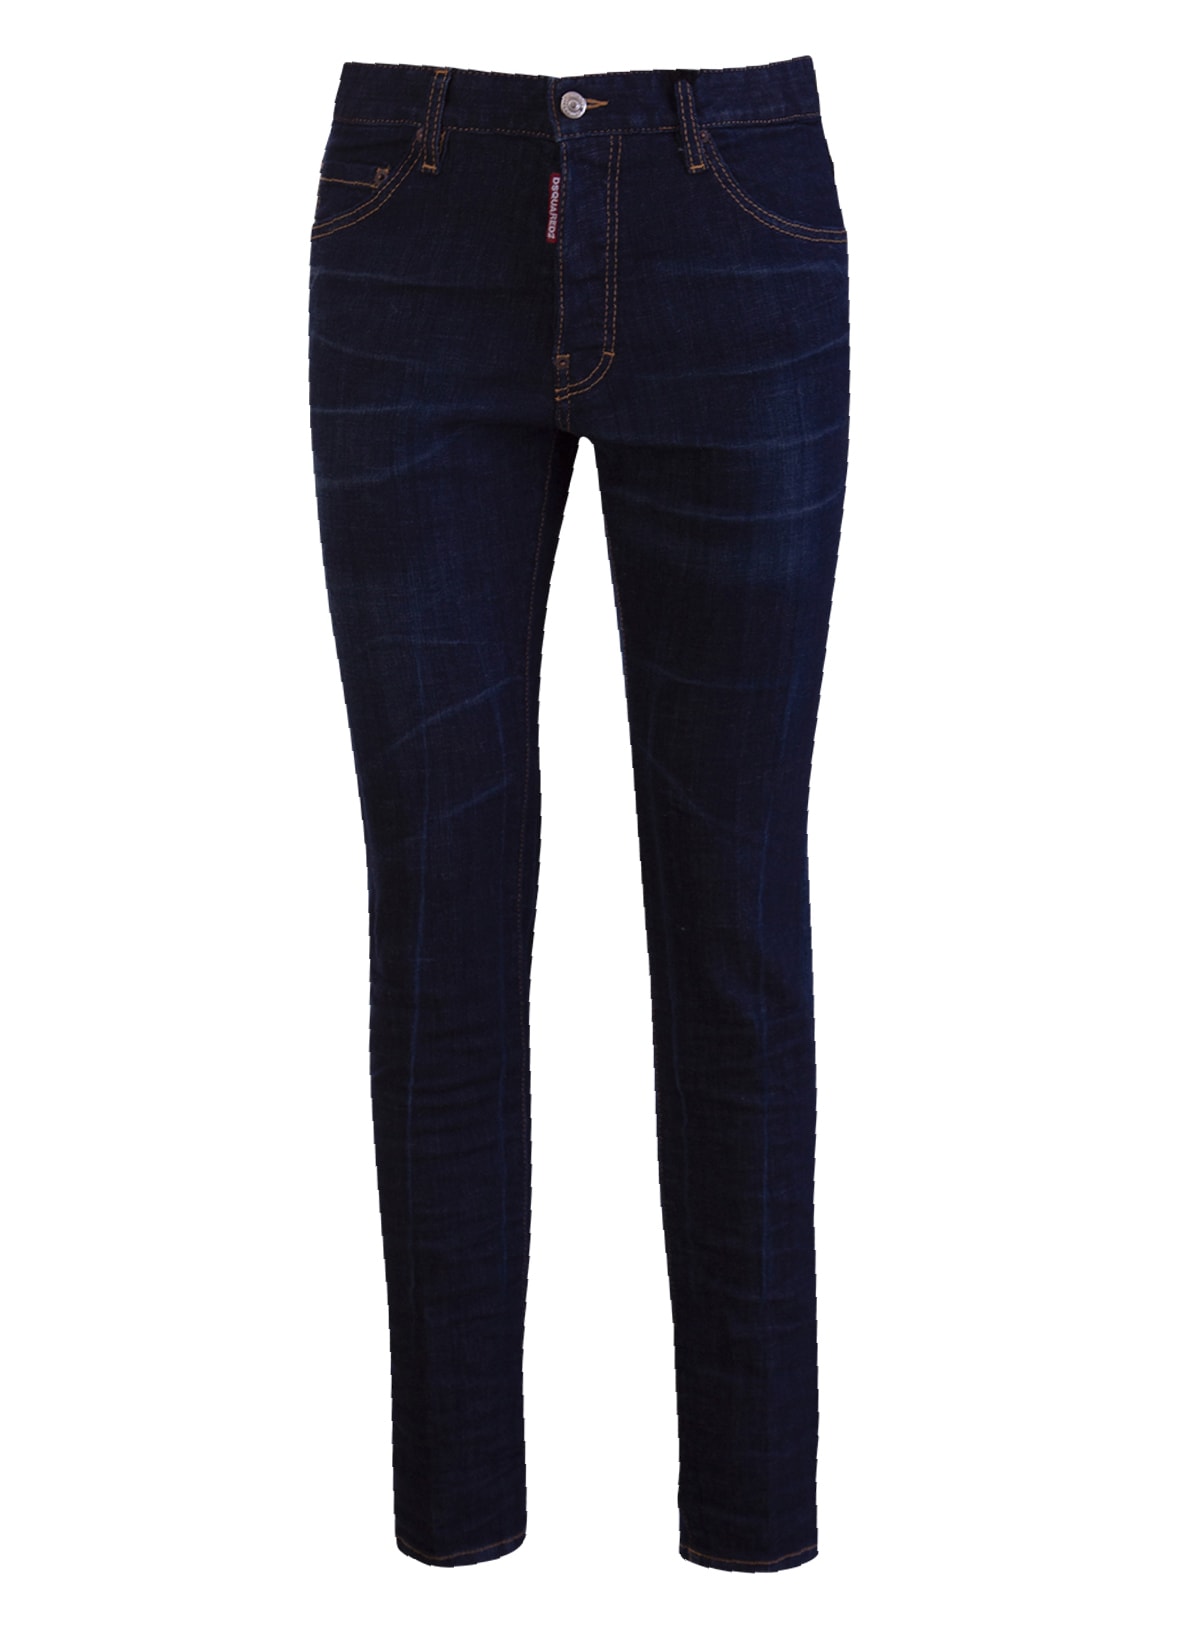 DSQUARED2 MID-RISE SKINNY JEANS,S71LB0875S30342470